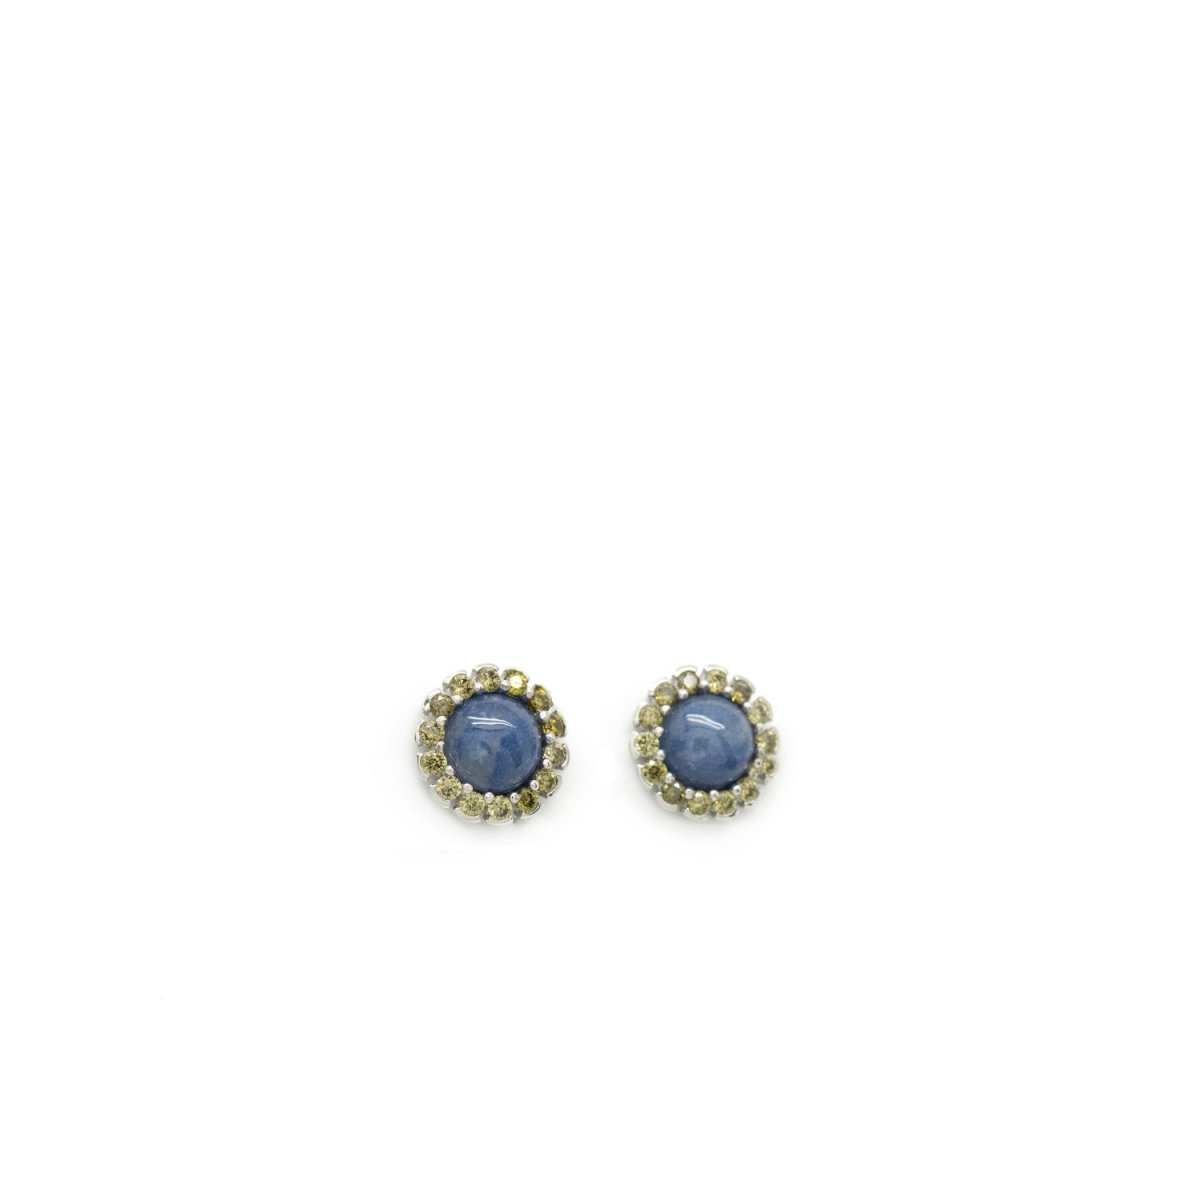 Natural stone earrings flower design sapphire tone - LINEARGENT